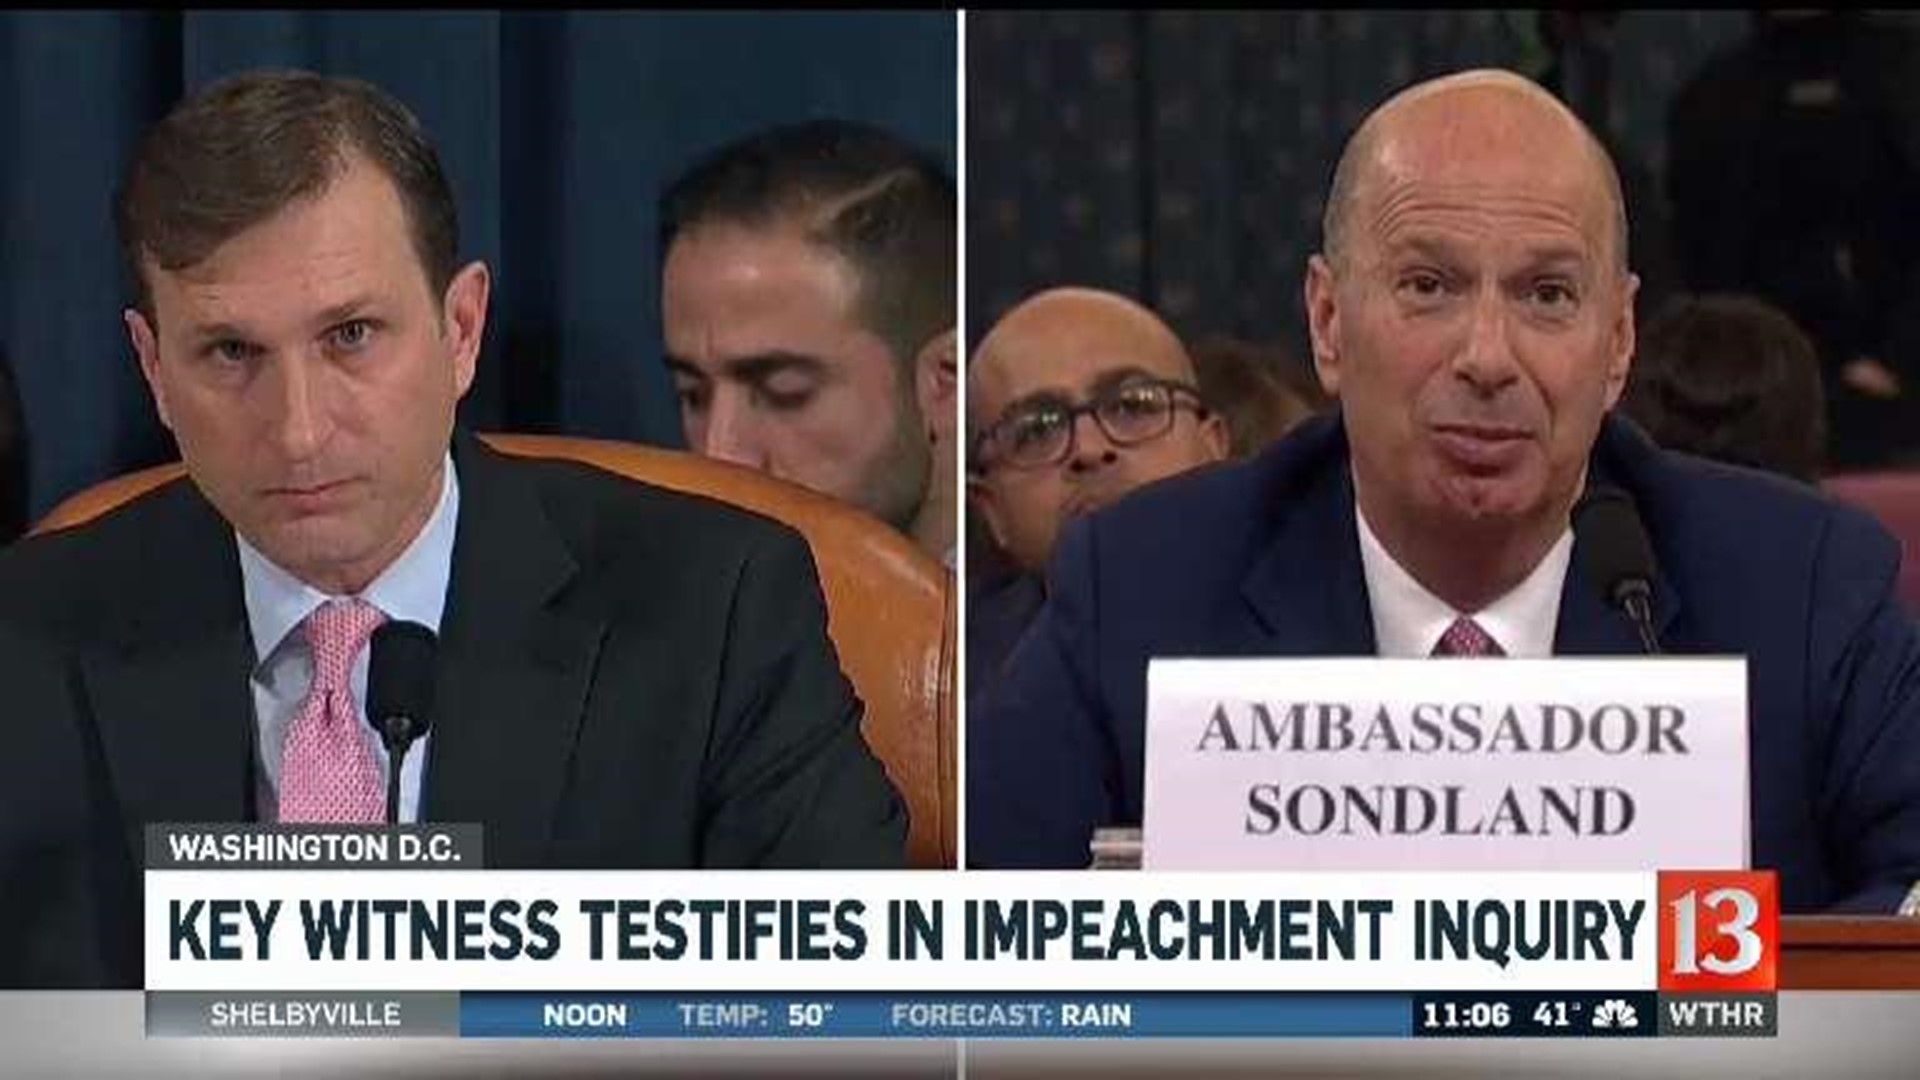 Key witness testifies in impeachment inquiry